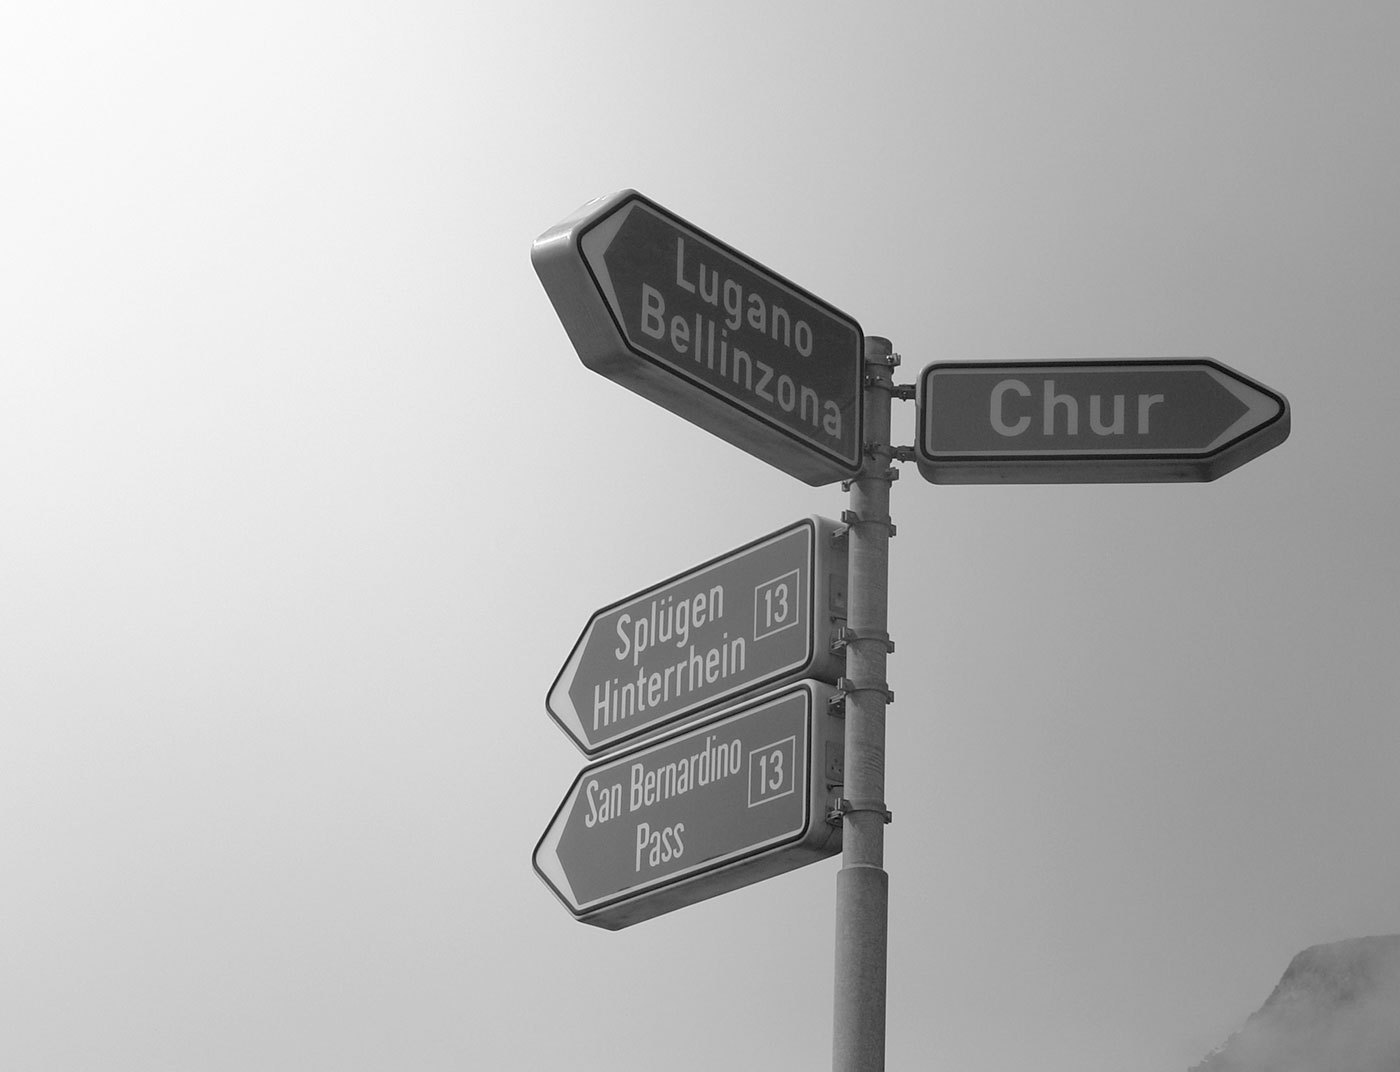 More information about "Traffic Sign Typefaces: Switzerland"